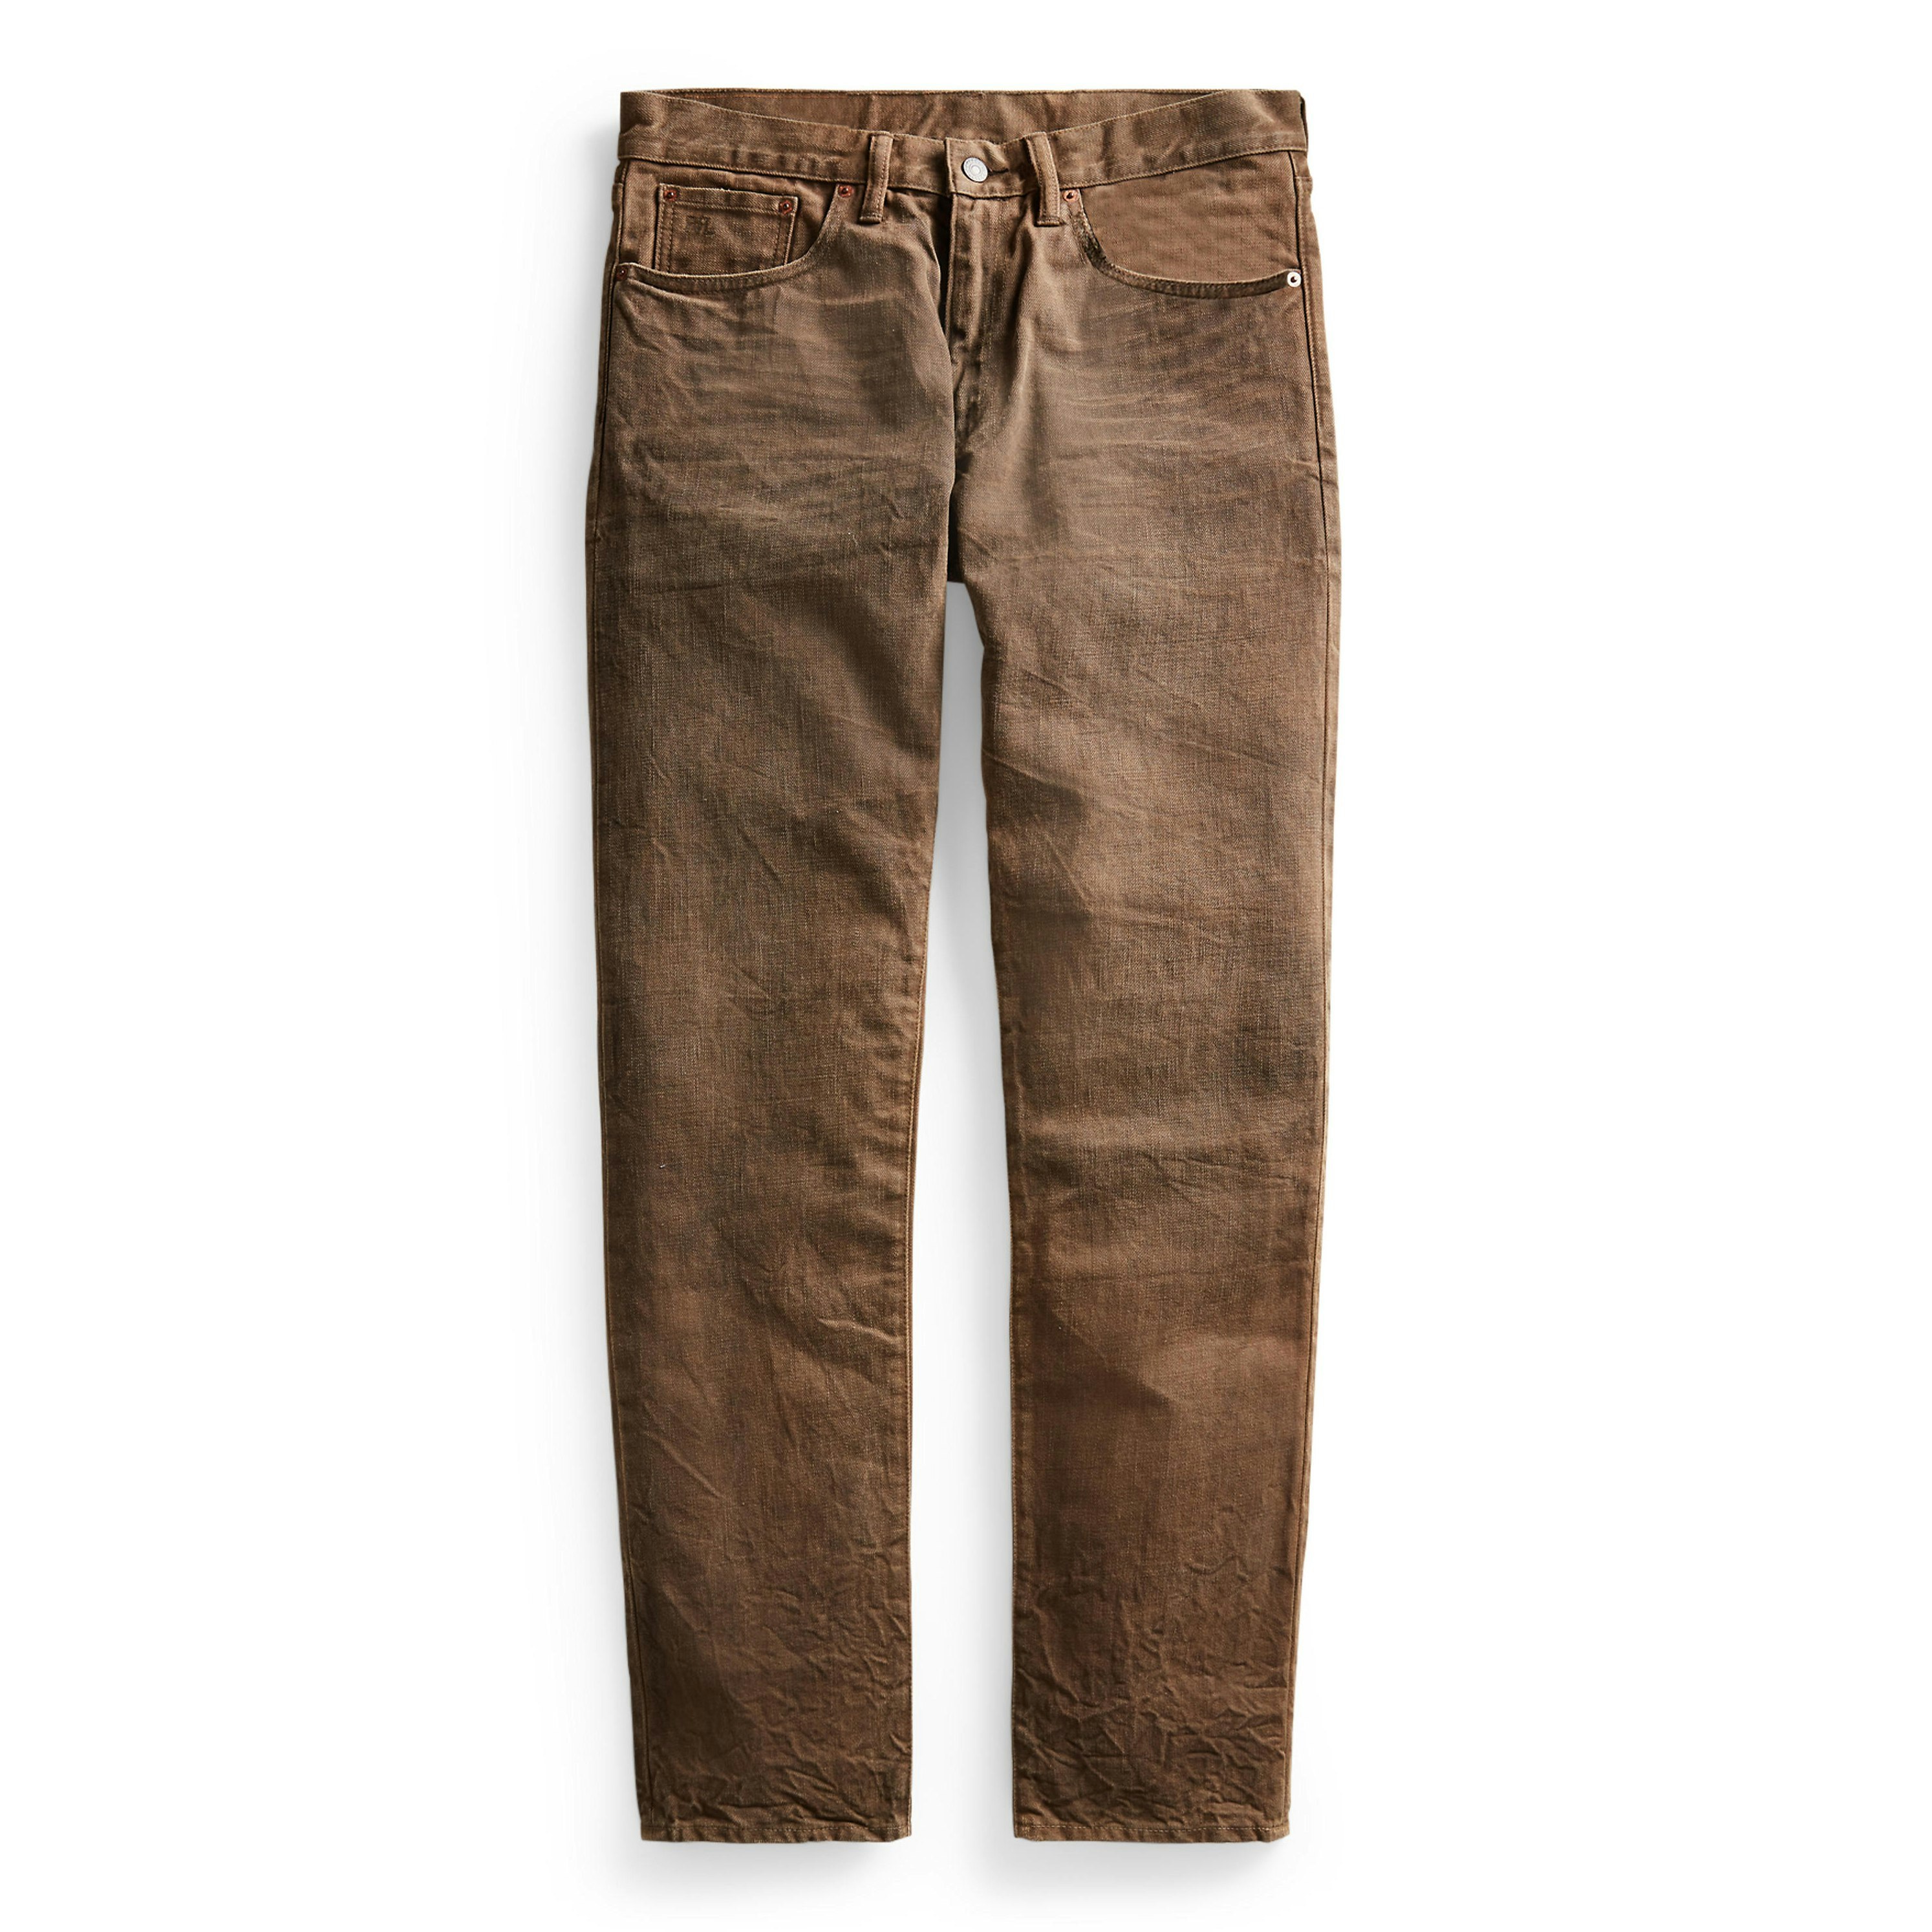 Brown Jeans For Women Online – Buy Brown Jeans Online in India